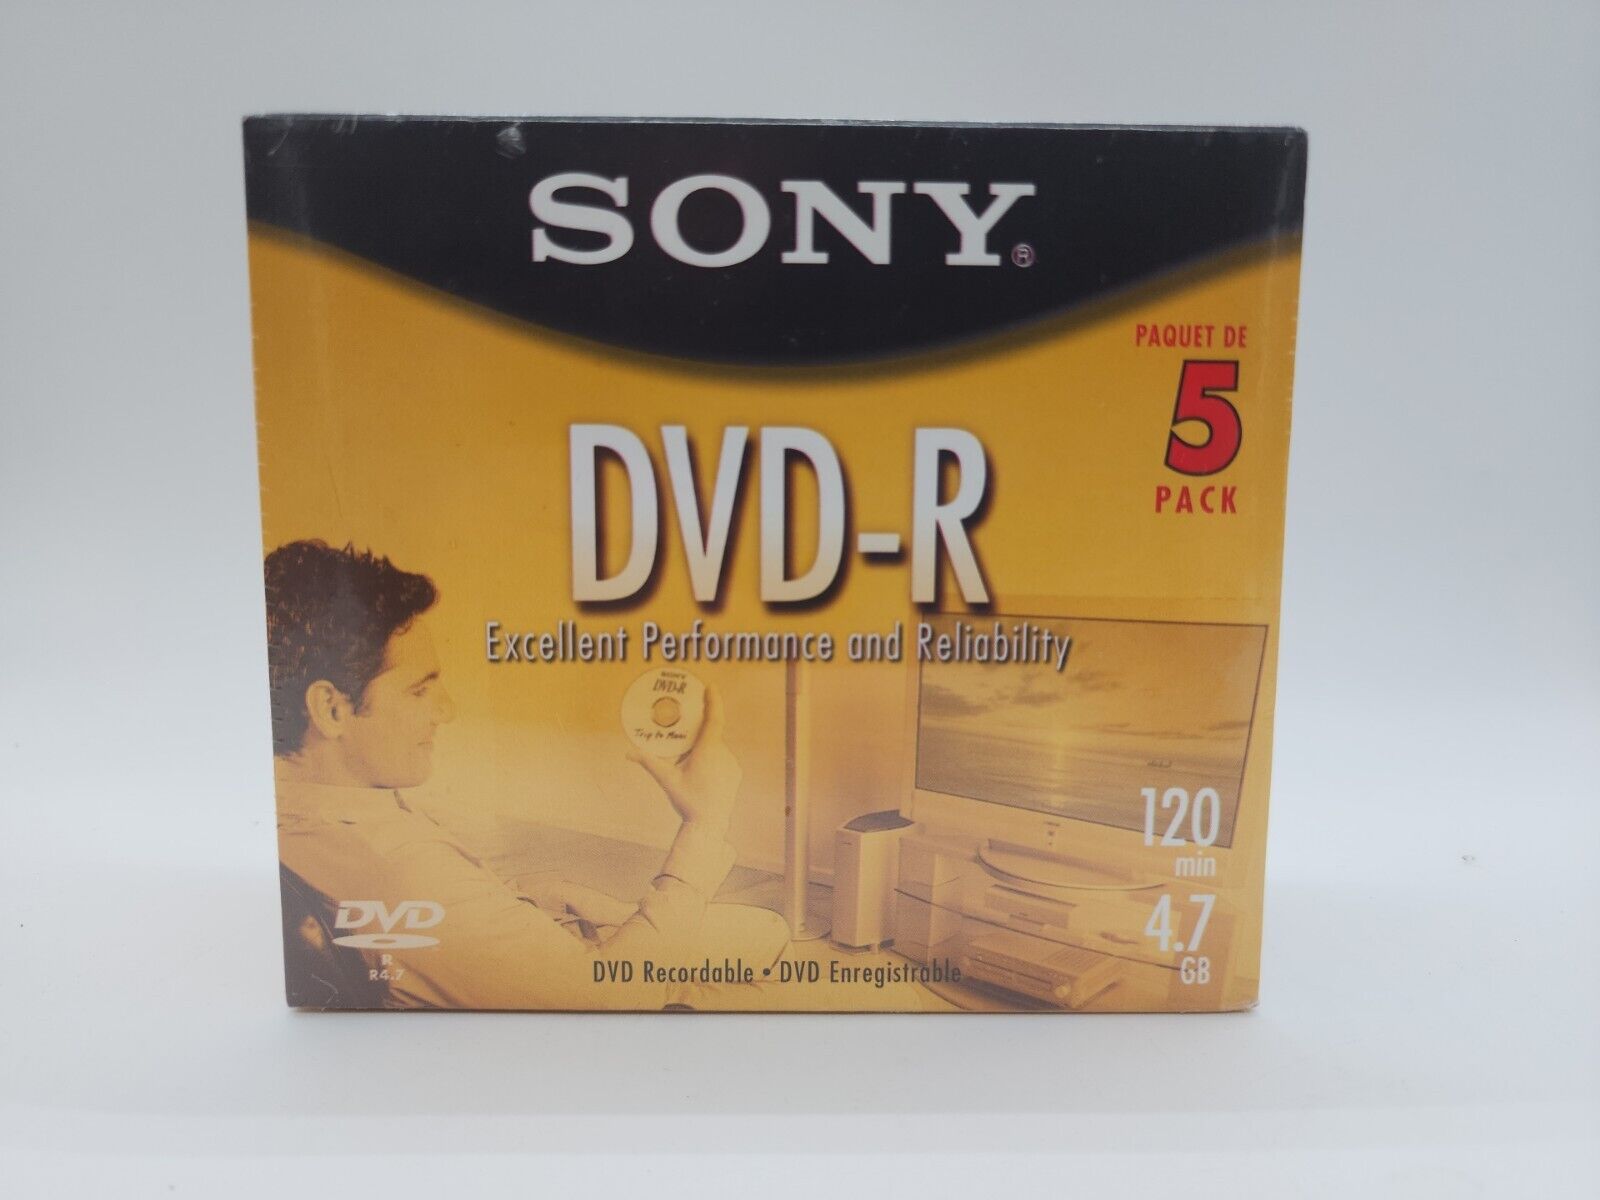 Sony DVD-R 120 min 4.7 GB 5 Pack Recordable DVD New factory sealed 